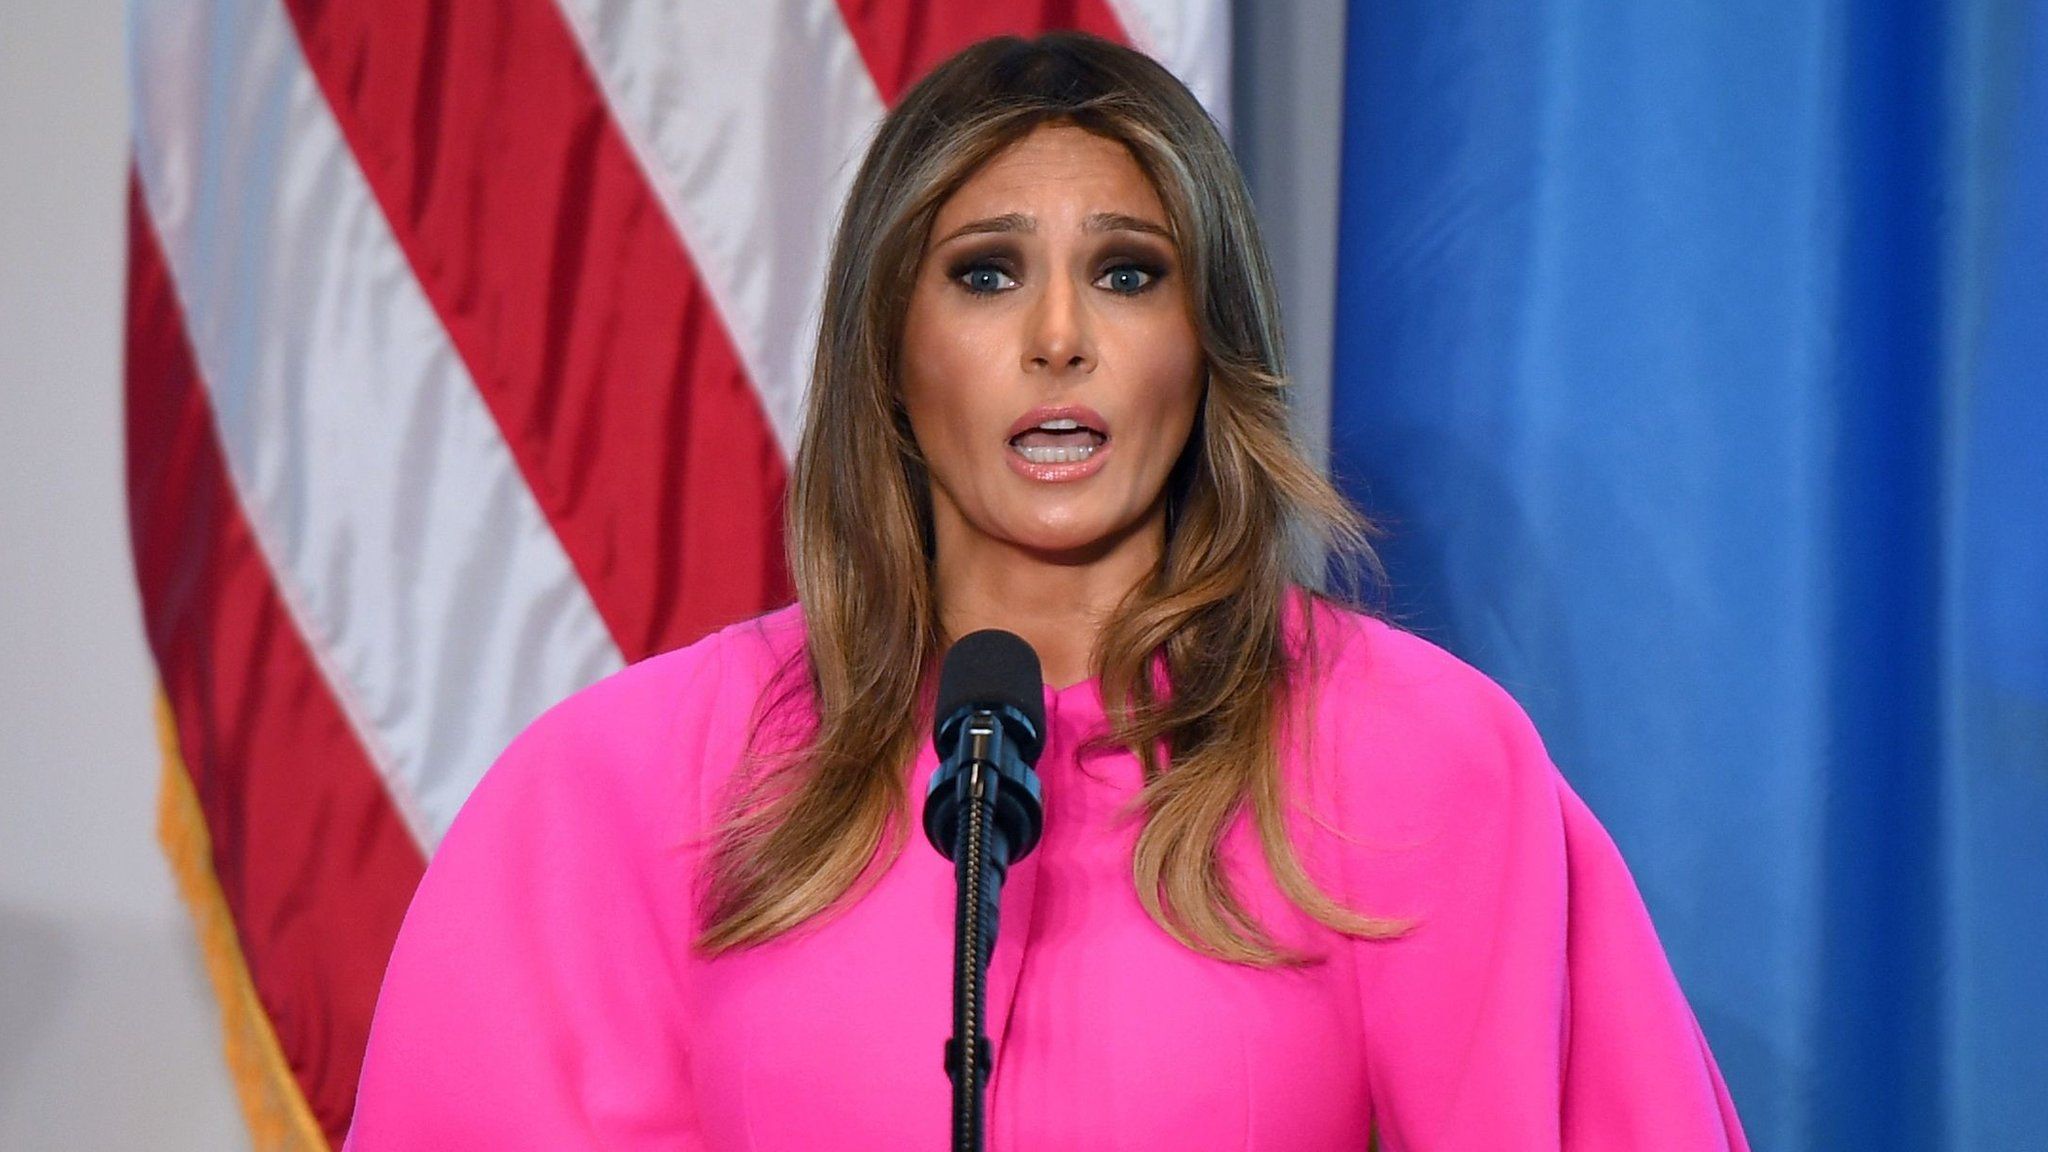 Melania Trump speaks at a luncheon at the UN General Assembly